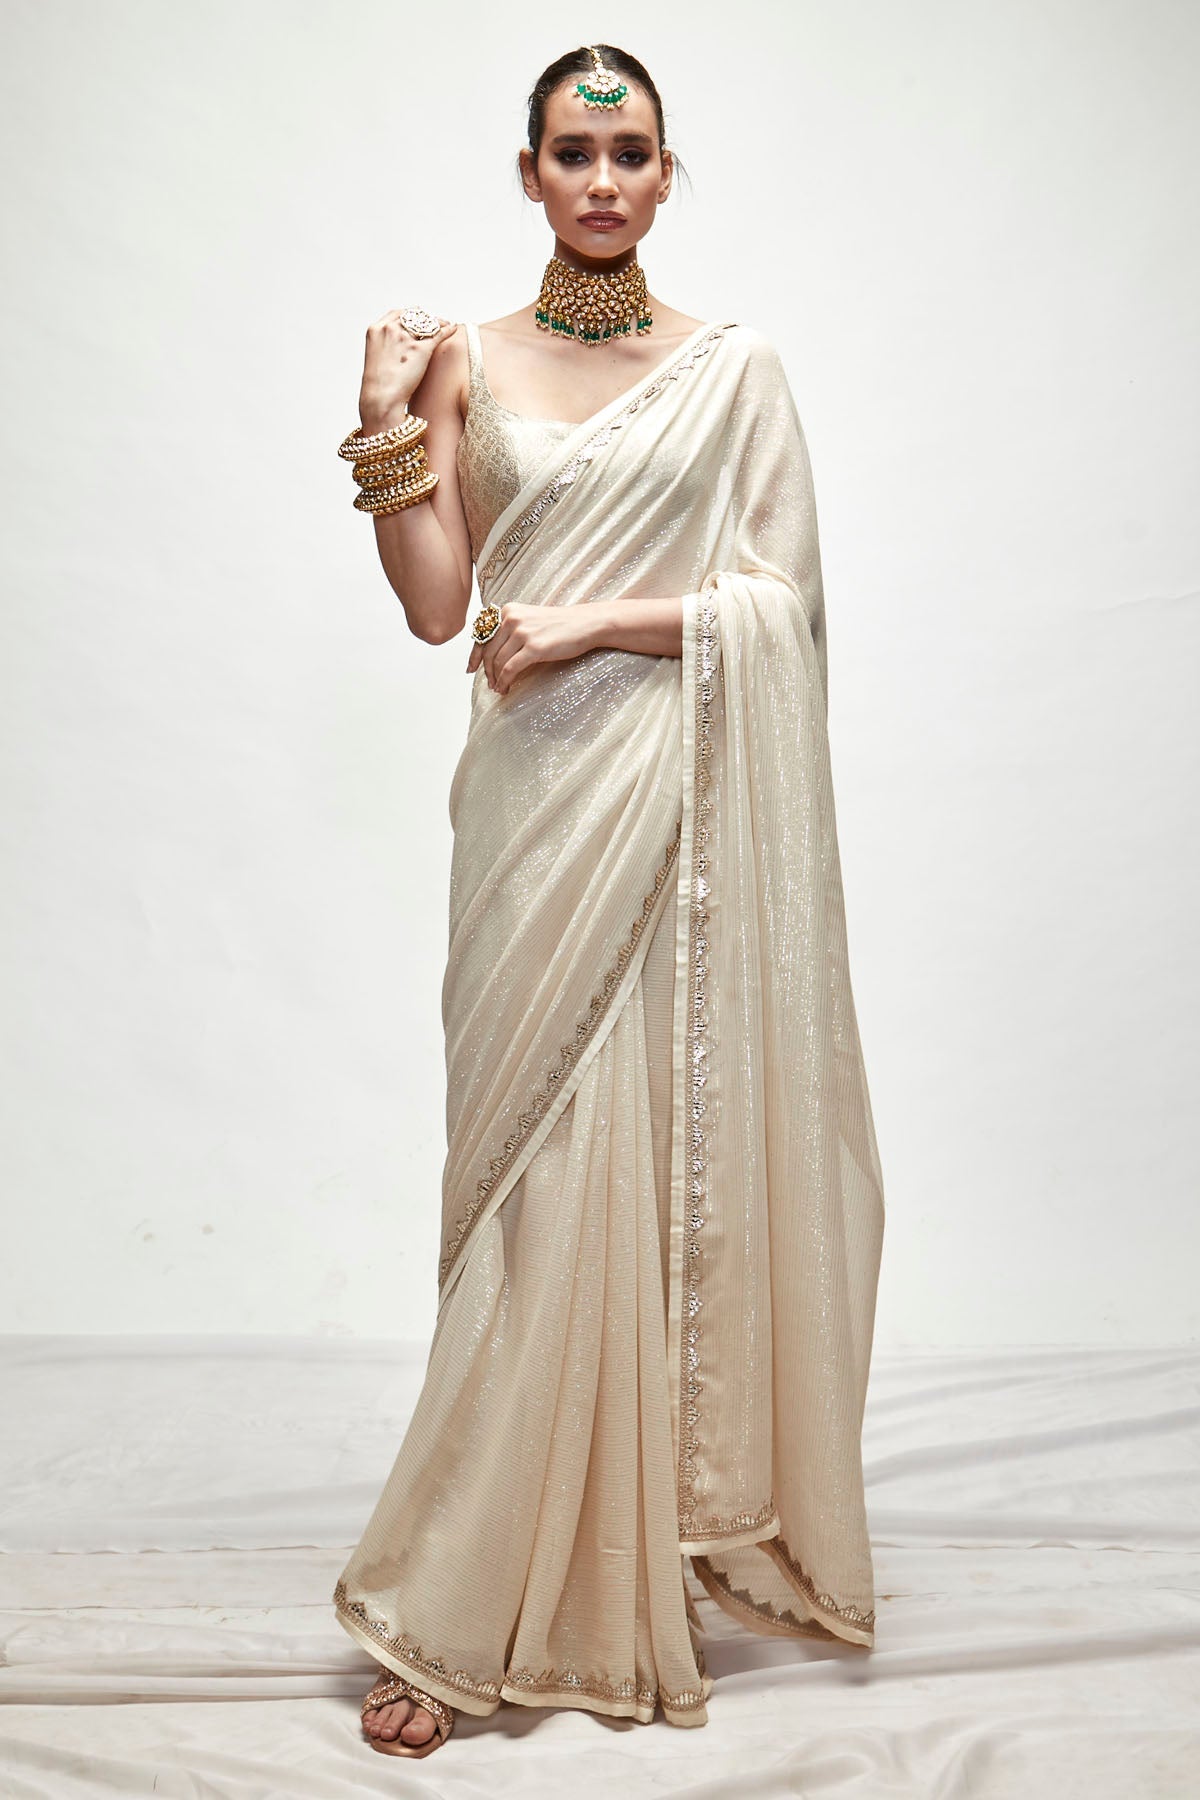 Designer Ranian Porcelain cream silk georgette saree with self woven gold and silver metallic threads, gota and silk satin paired with silk brocade champagne matt zari blouse For Women Online at ScrollnShops